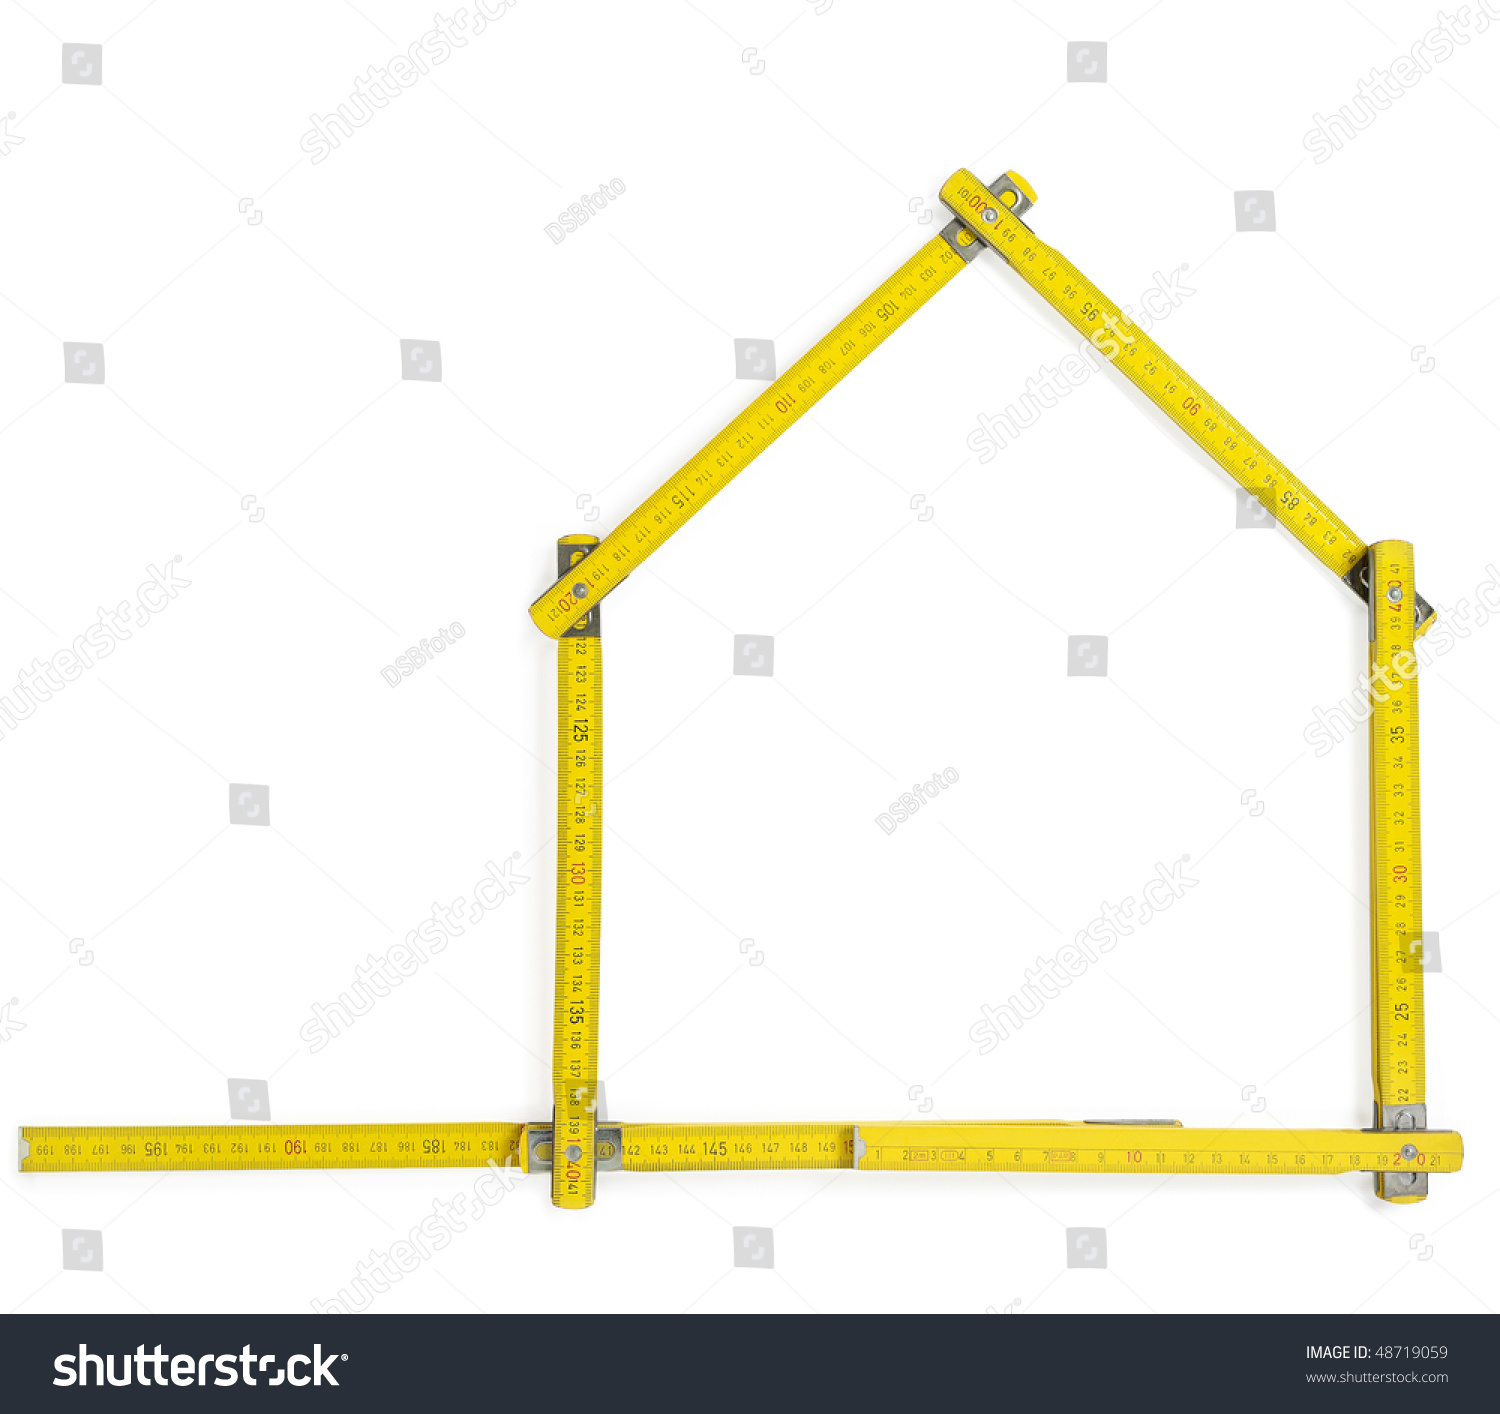 Carpenter rule showing a house shape against white background. With clipping path #48719059